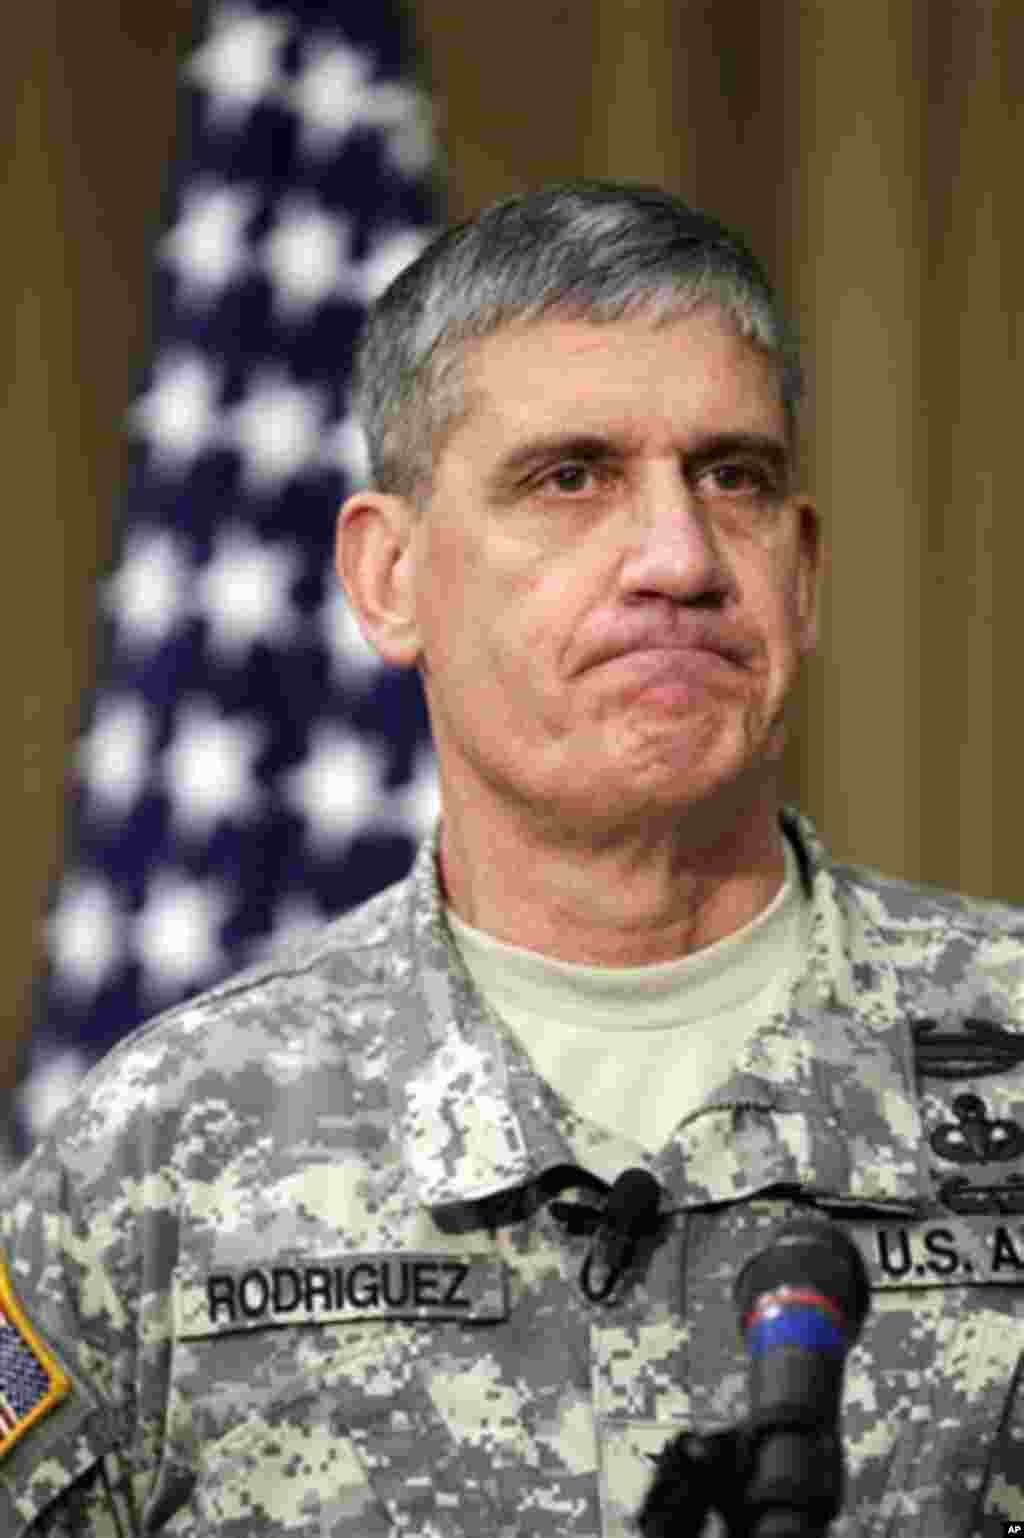 Army Gen. David M. Rodriguez, commanding general of U.S. Army Forces Command, talks to reporters, Friday, March 16, 2012, at Joint Base Lewis-McChord in Washington state. Rodriguez said there was �sufficient screening� for post-traumatic stress disorders 